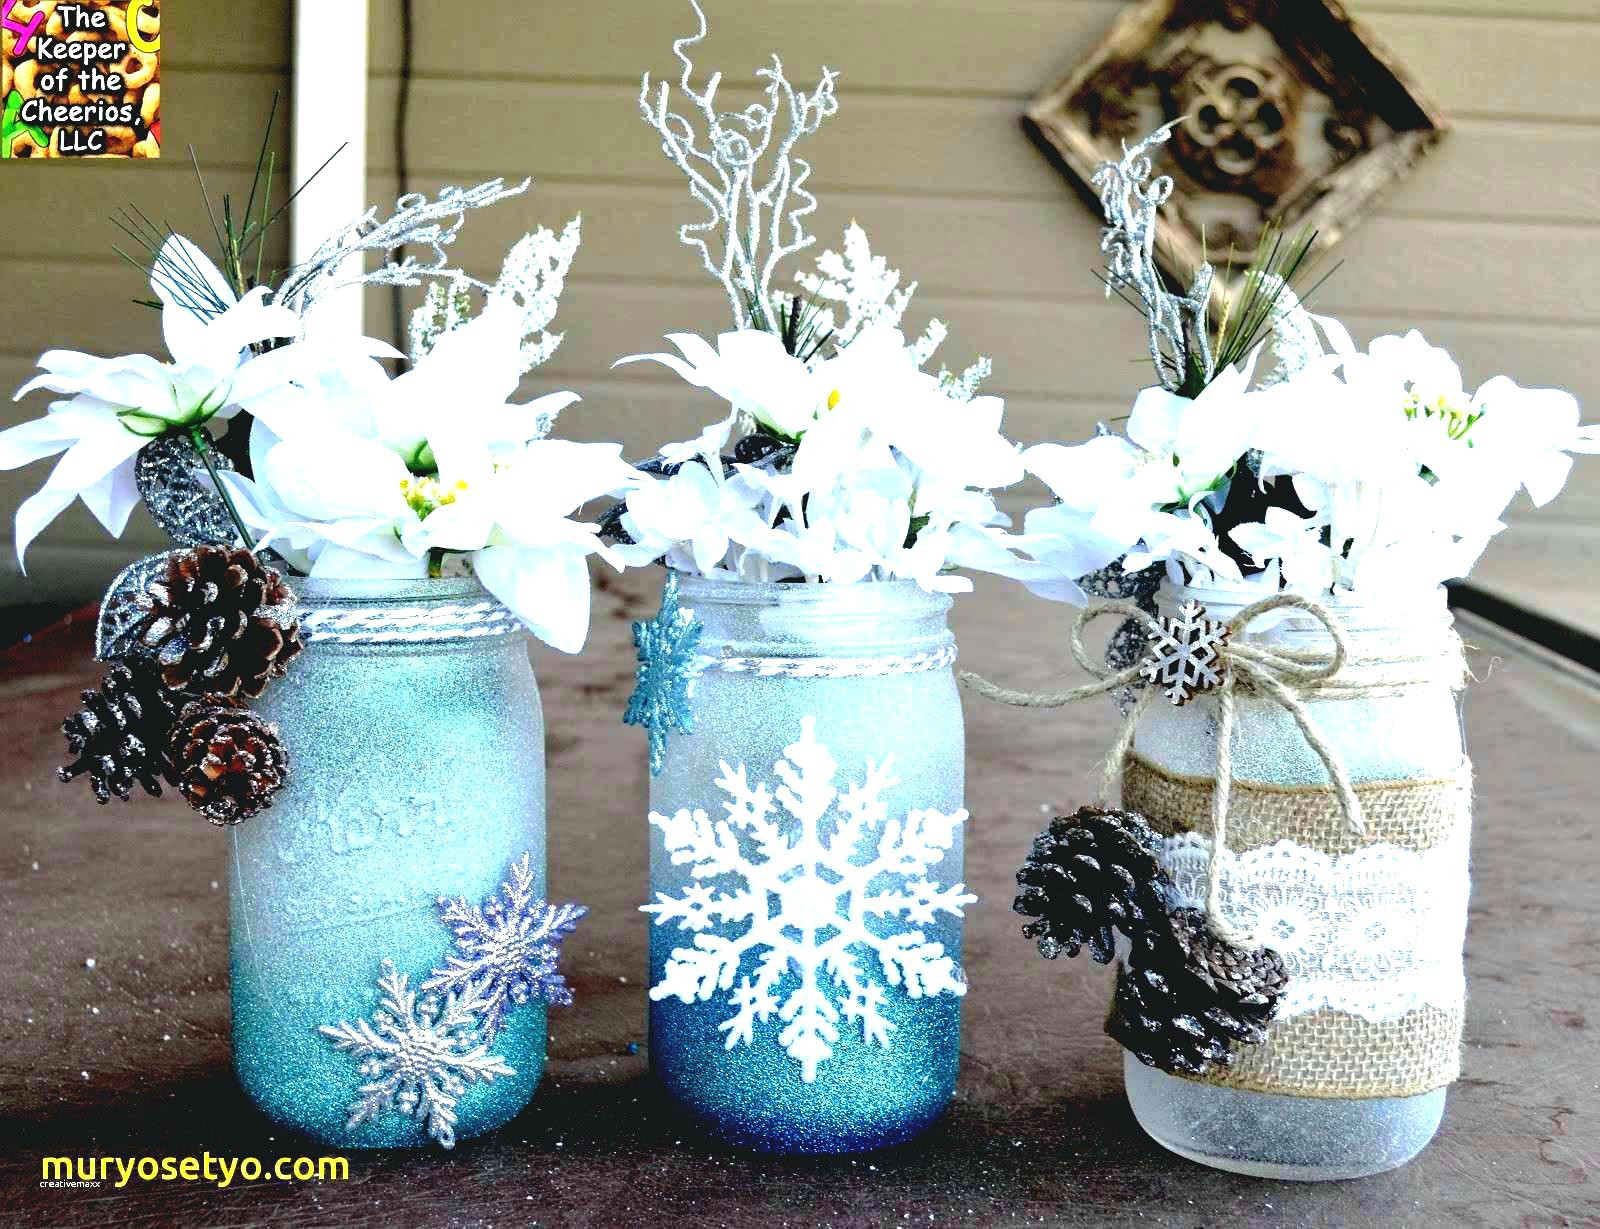 January Crafts For Adults
 The top 20 Ideas About January Crafts for Adults Home